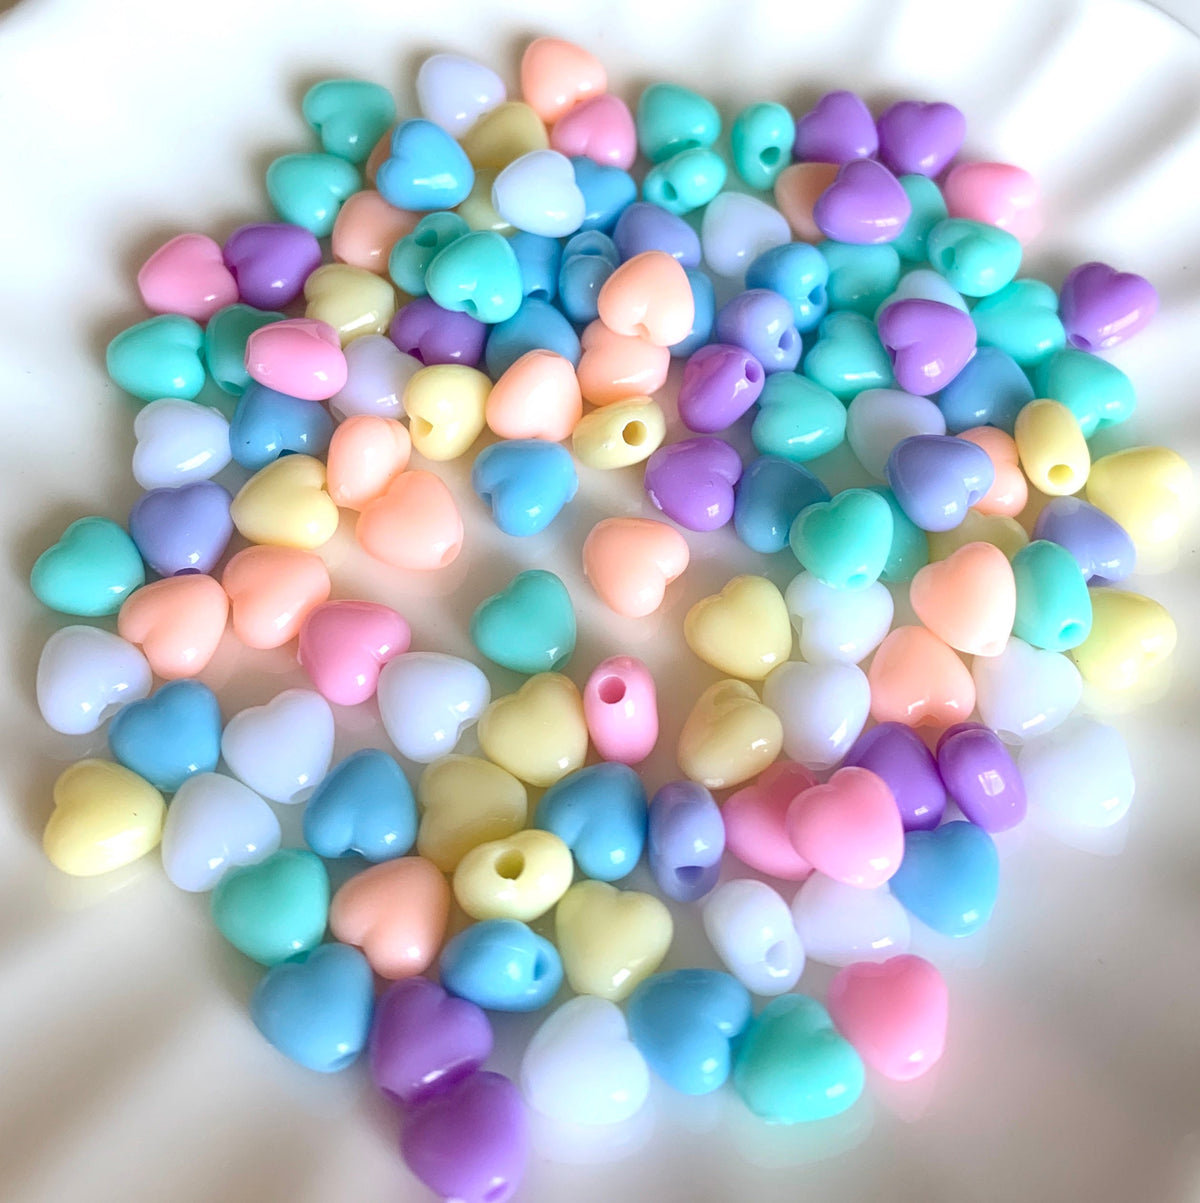 Small Pastel Heart Beads, Cute Heart Beads for Earrings, Pastel Beads for  Jewelry Making, Cute Heart Bead Mix, Fairy Kei Beads, Heart Shaped